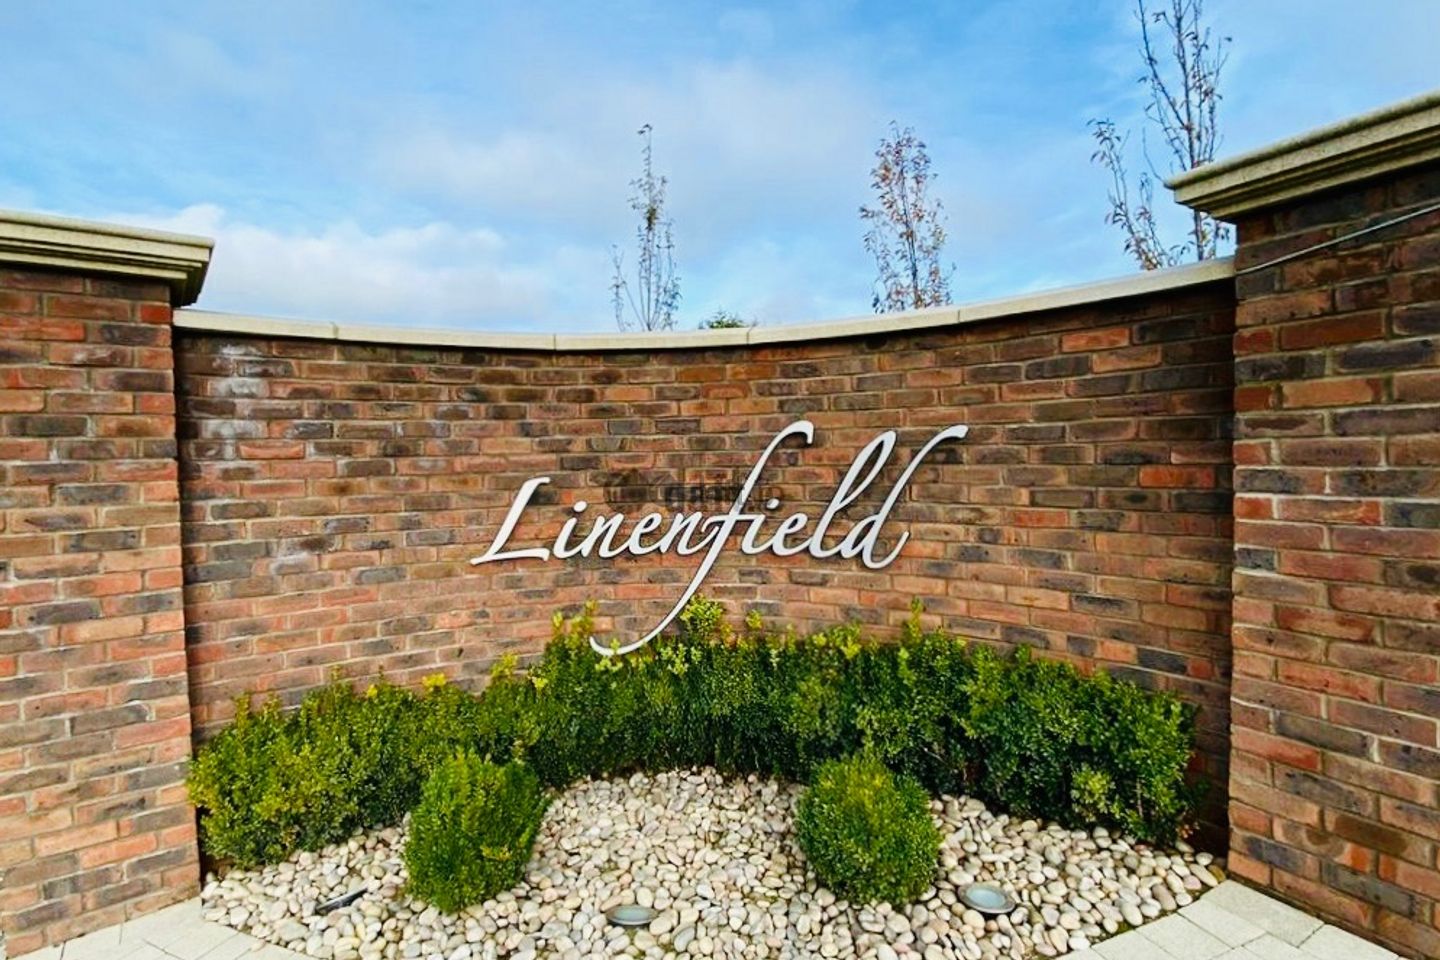 Linenfileld crescent Ballymakeny road , Ballymakenny, Co. Louth